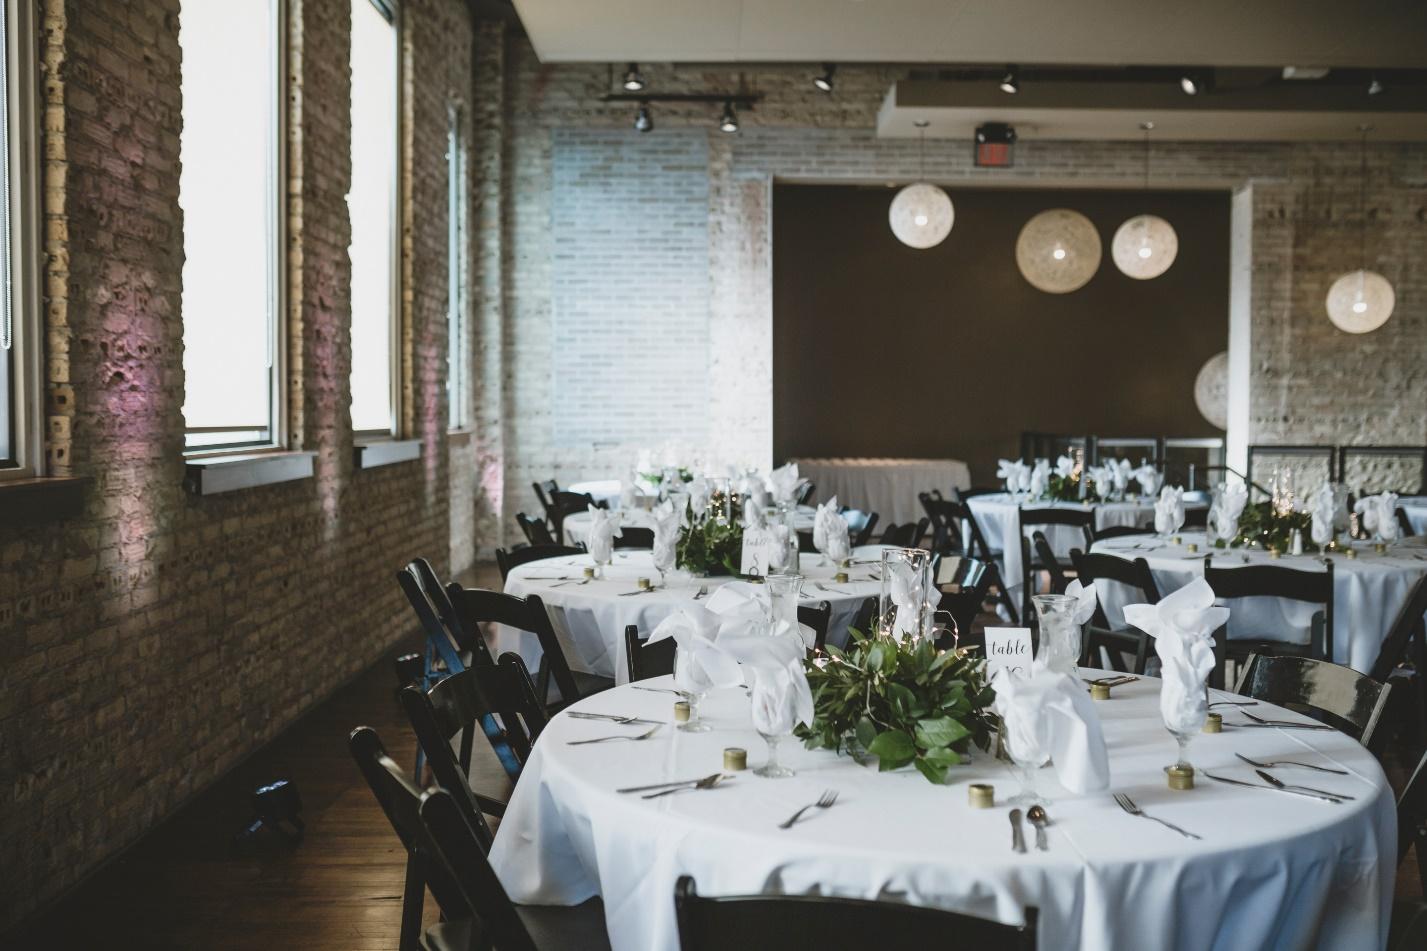 Featured image for post: FIVE Reasons Why FIVE Event Center is a Party Venue Favorite